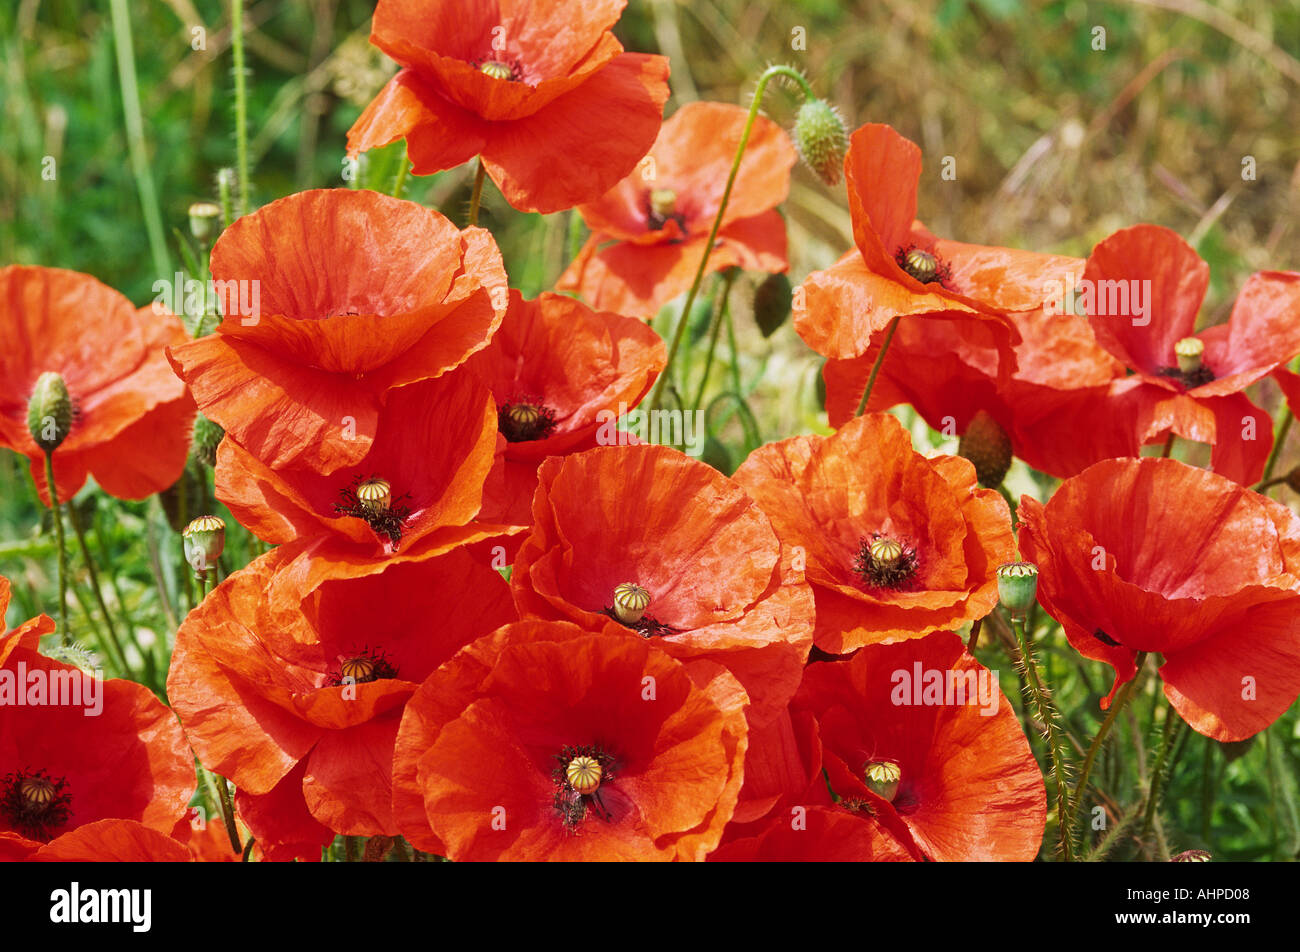 Cluster of Poppies Showing Various Stages from Buds to Seed heads Stock Photo